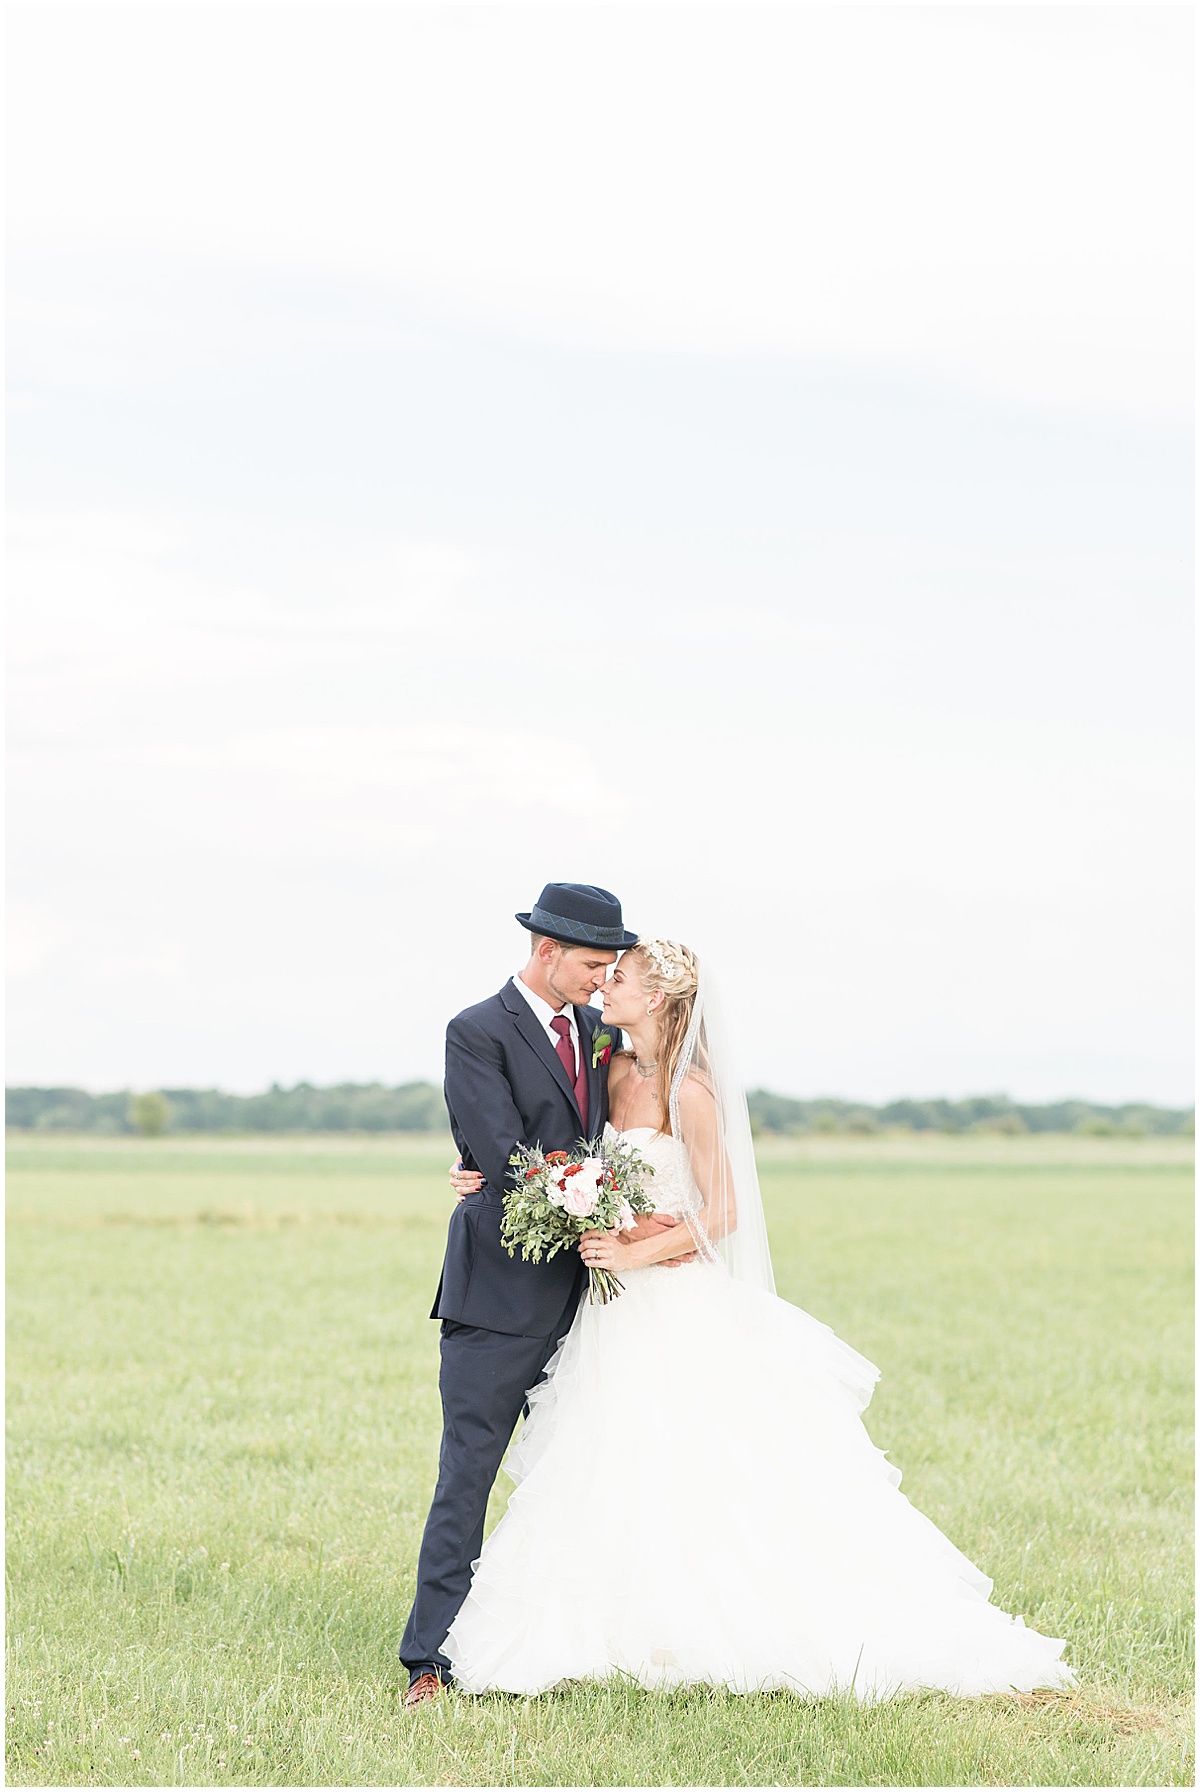 Wedding in Lafayette, Indiana Photographed by Victoria Rayburn Photography